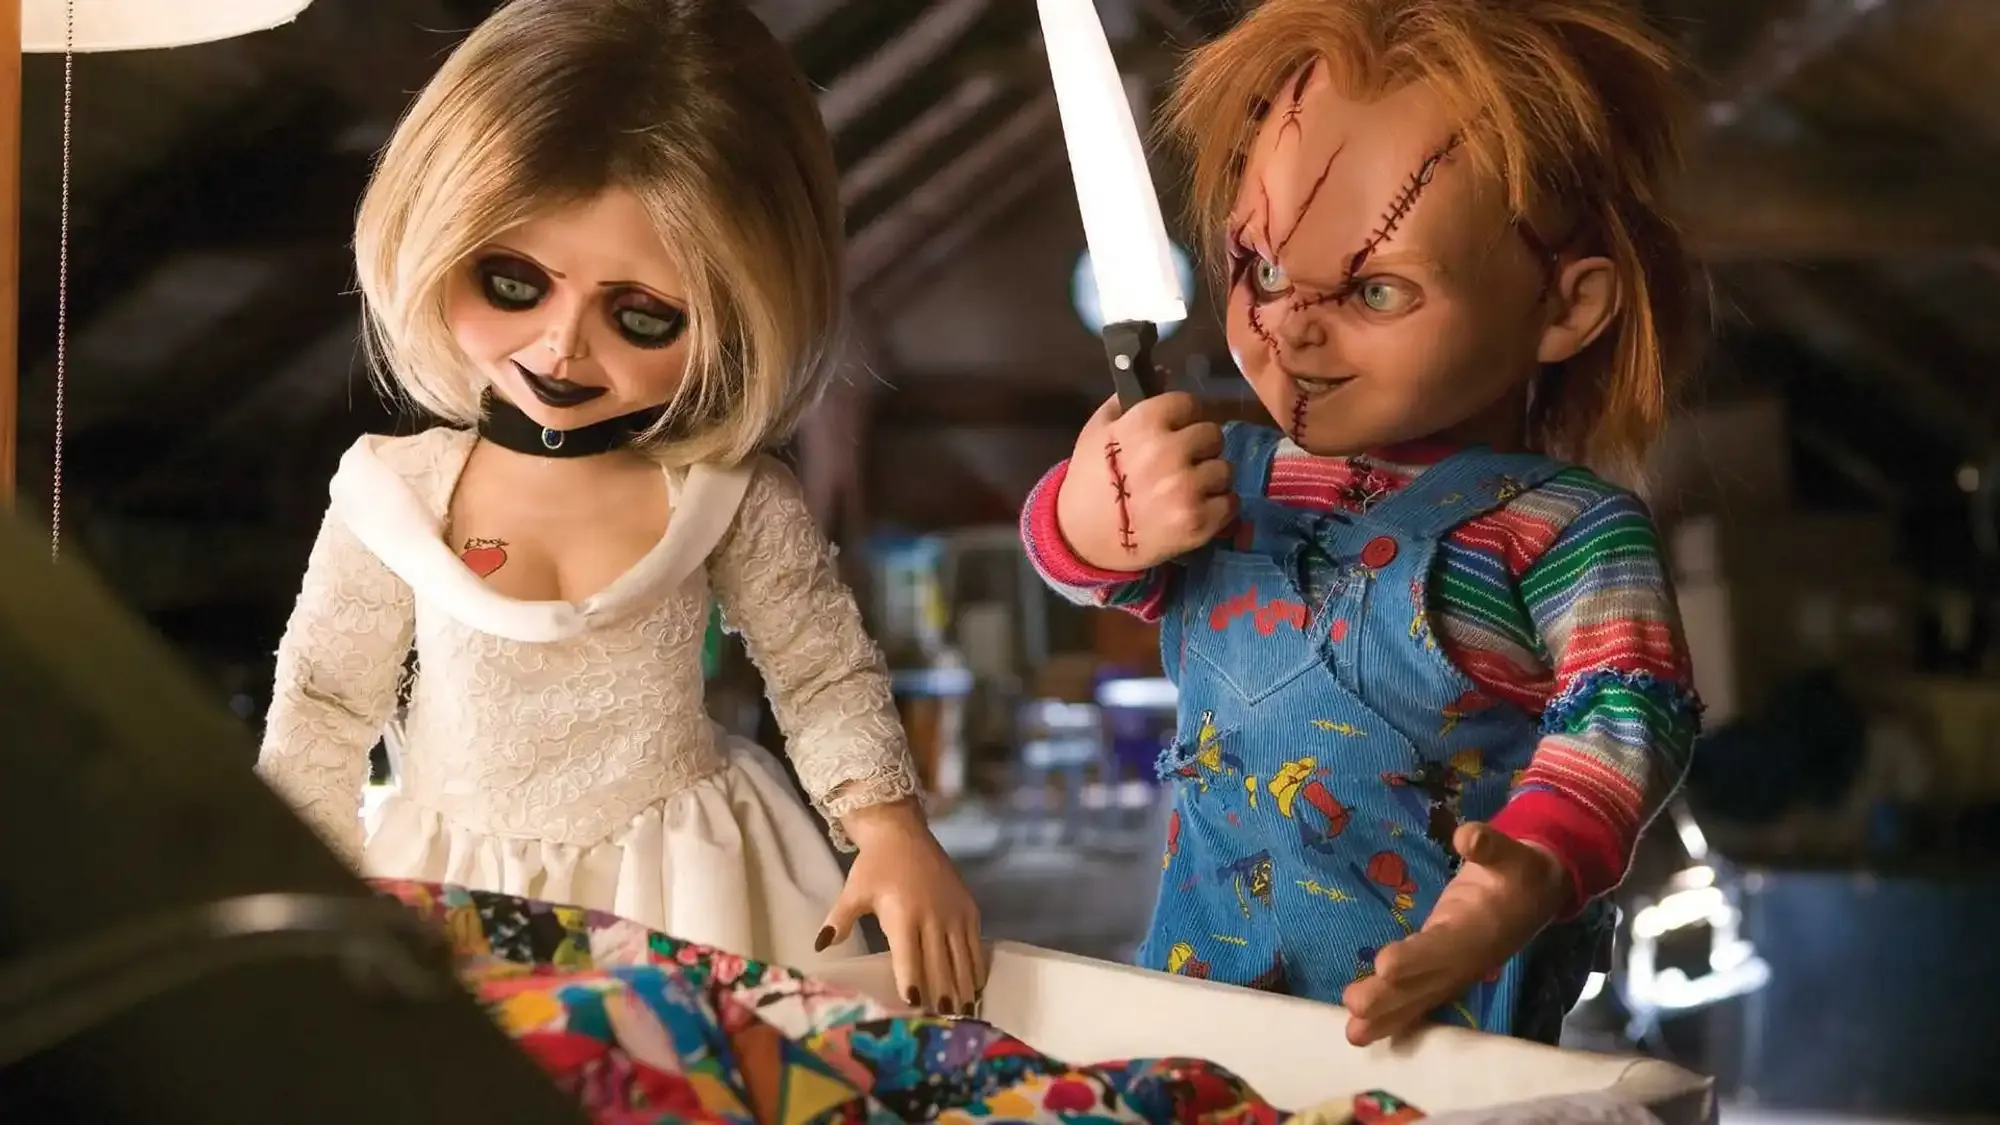 Seed of Chucky movie review